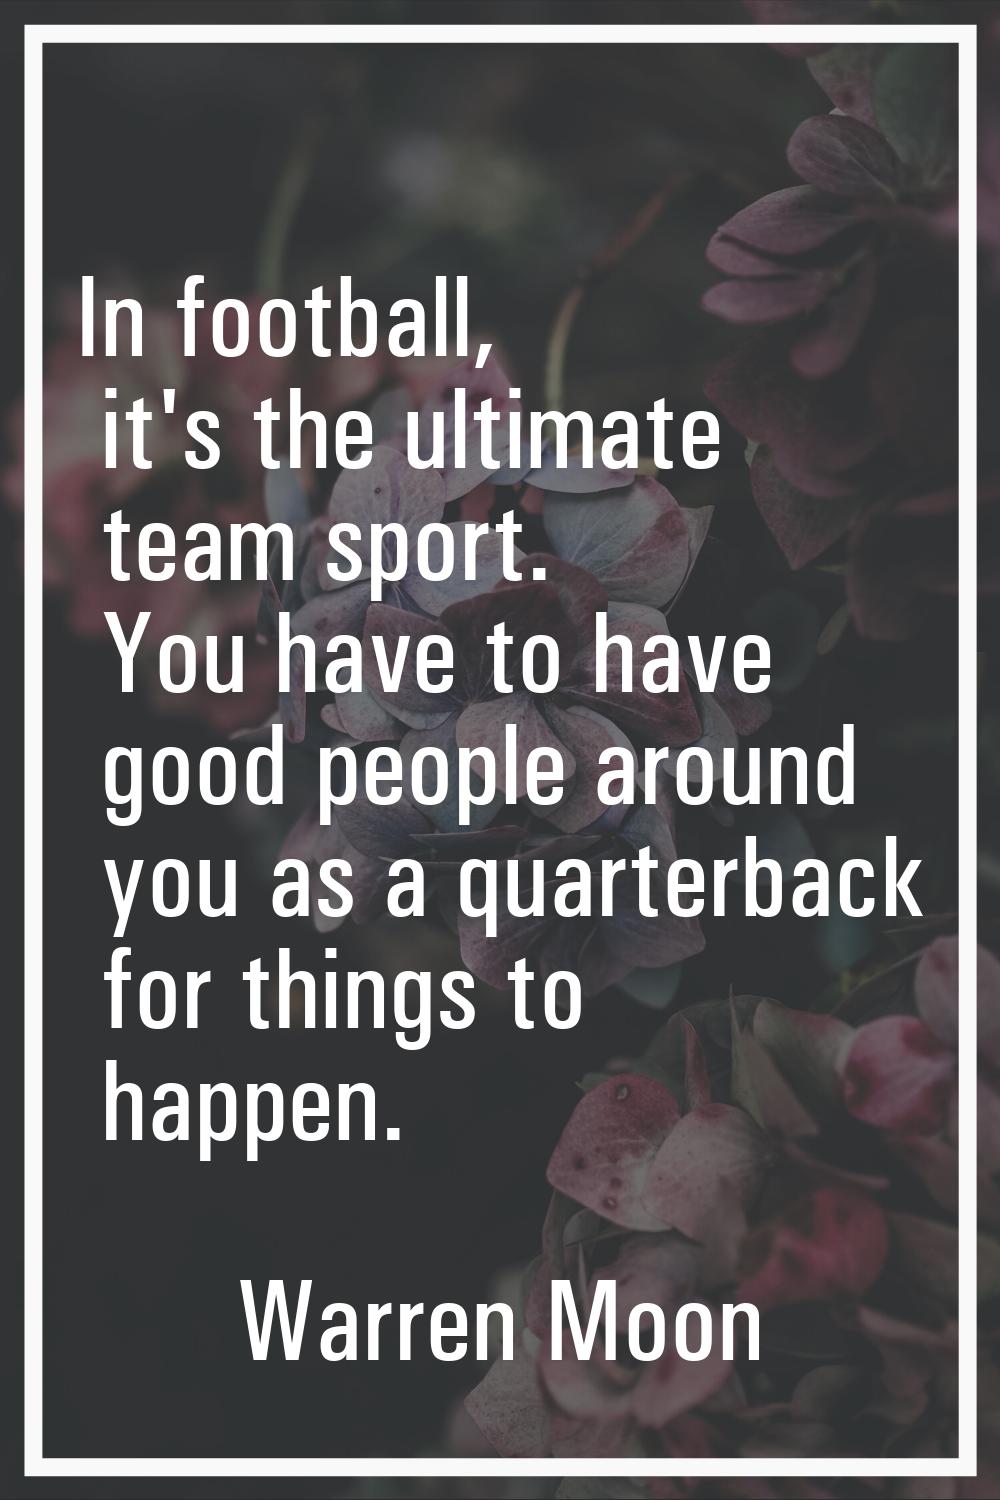 In football, it's the ultimate team sport. You have to have good people around you as a quarterback